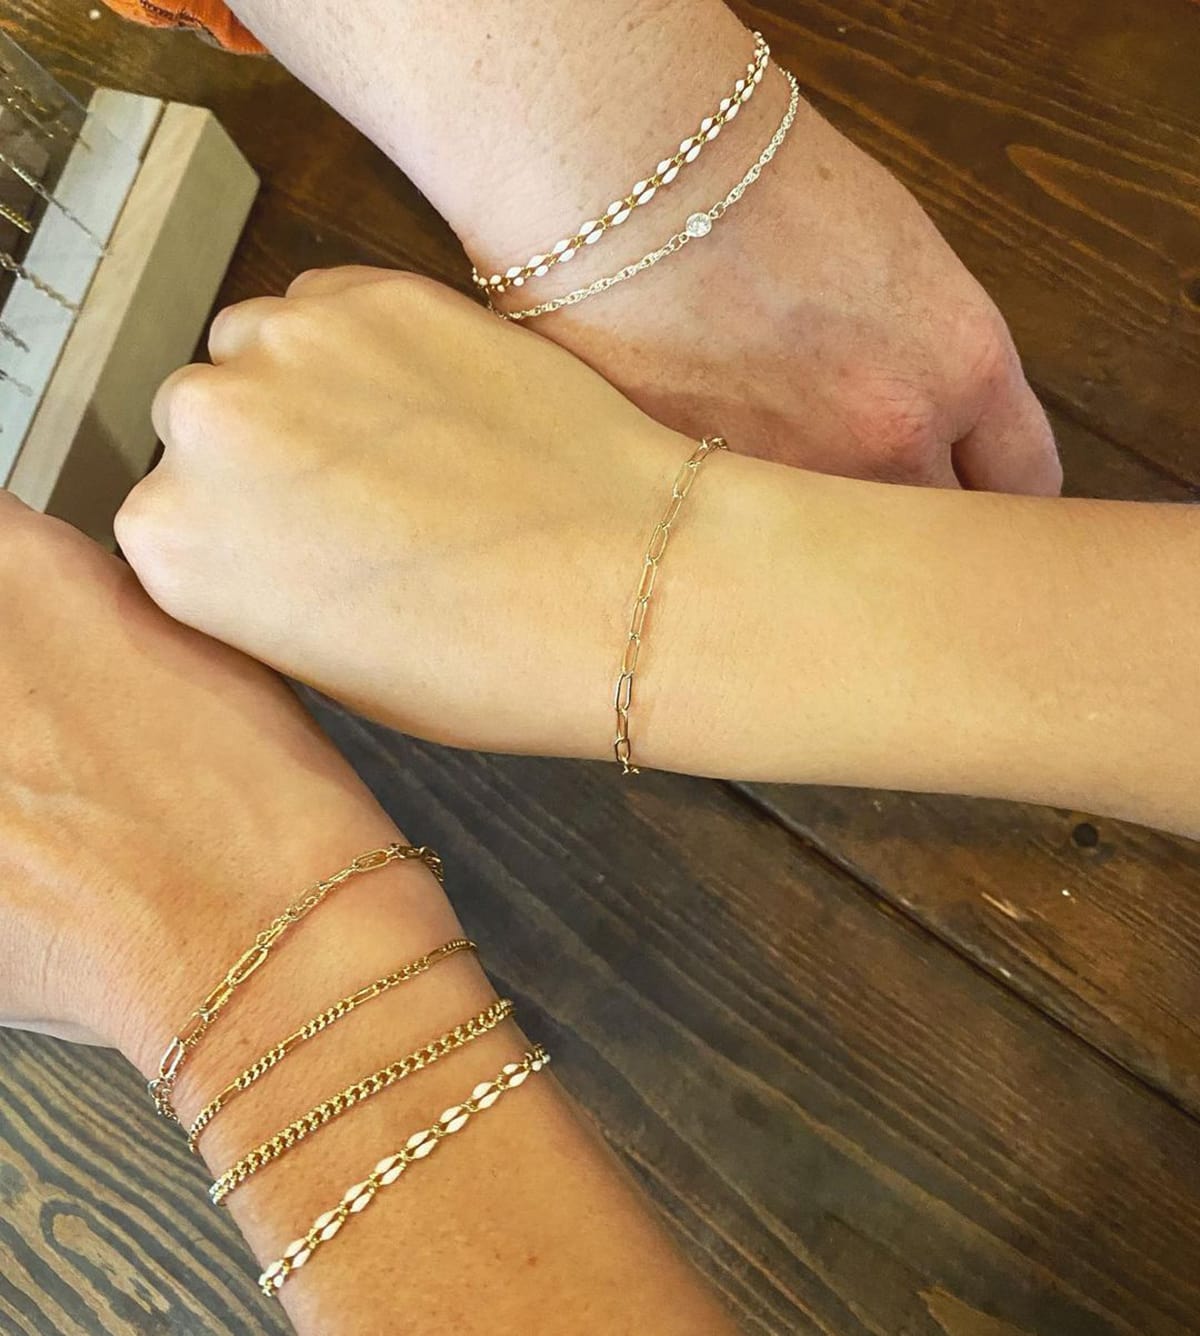 Permanent jewelry is the latest trend to sweep social media